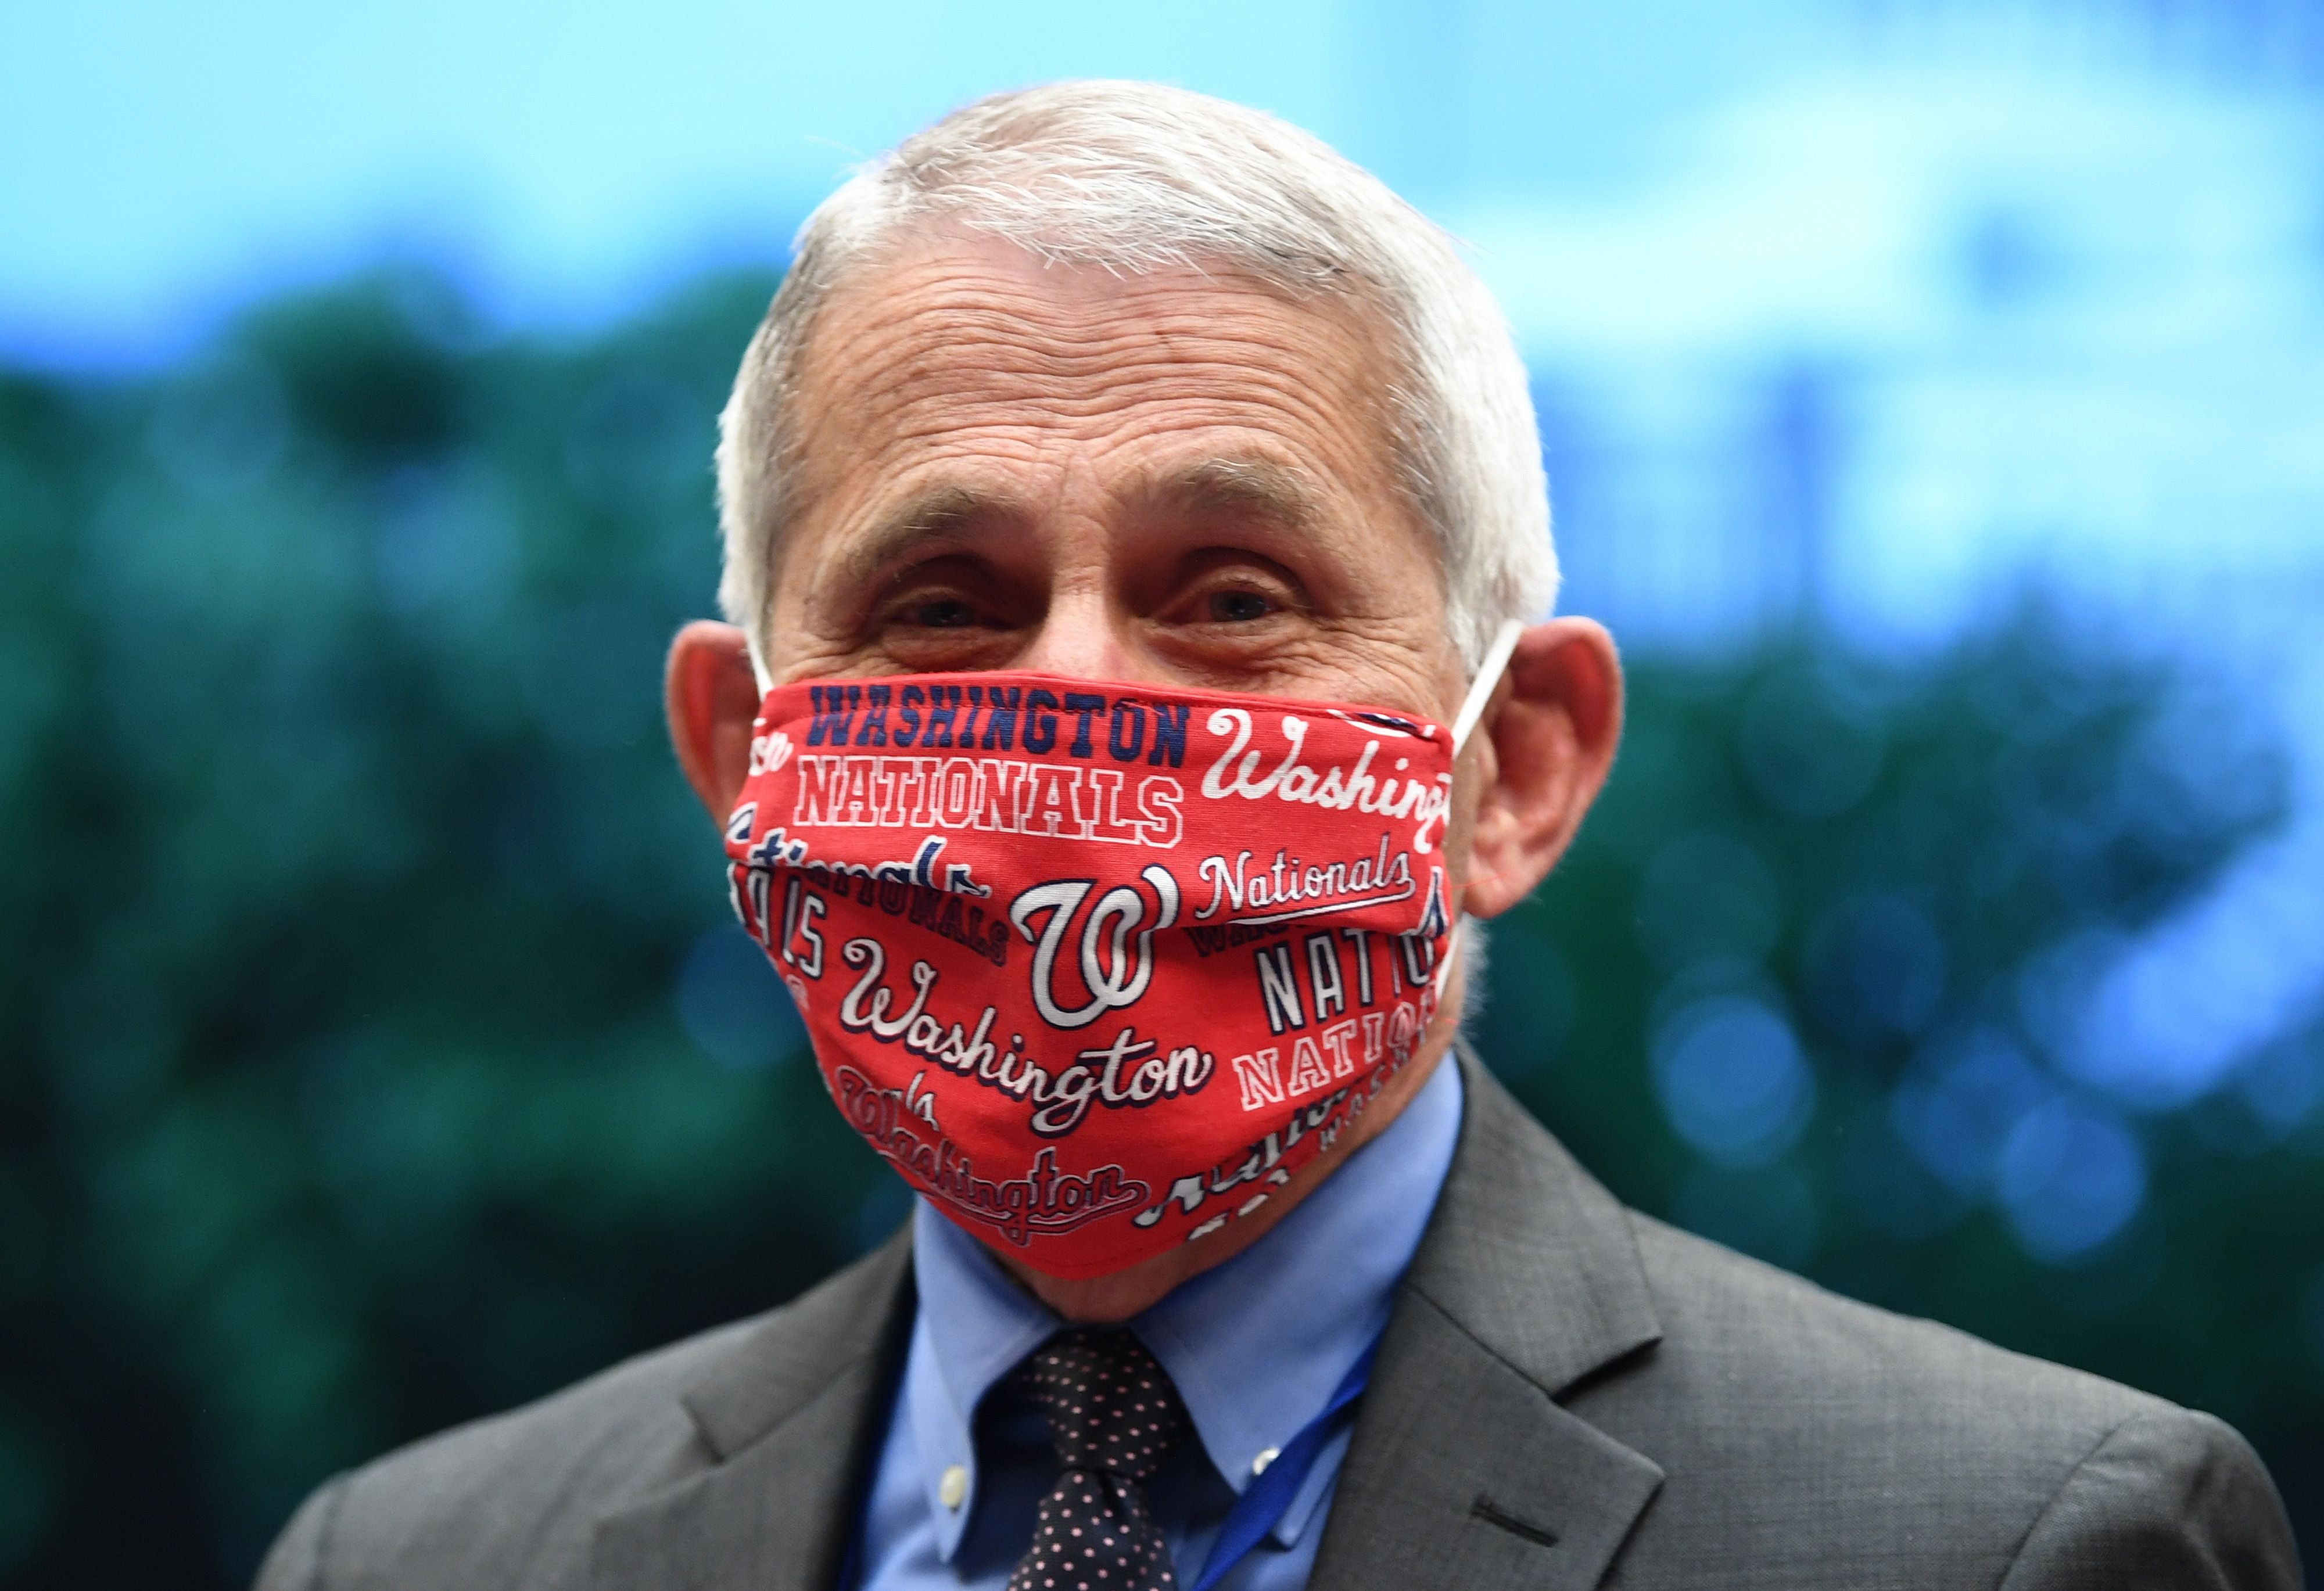 Dr. Anthony Fauci wore a face mask with logos for the Washington Nationals at a meeting for the House Committee on Capitol Hill on June 23, 2020, in Washington, DC | Source: Kevin Dietsch-Pool/Getty Images